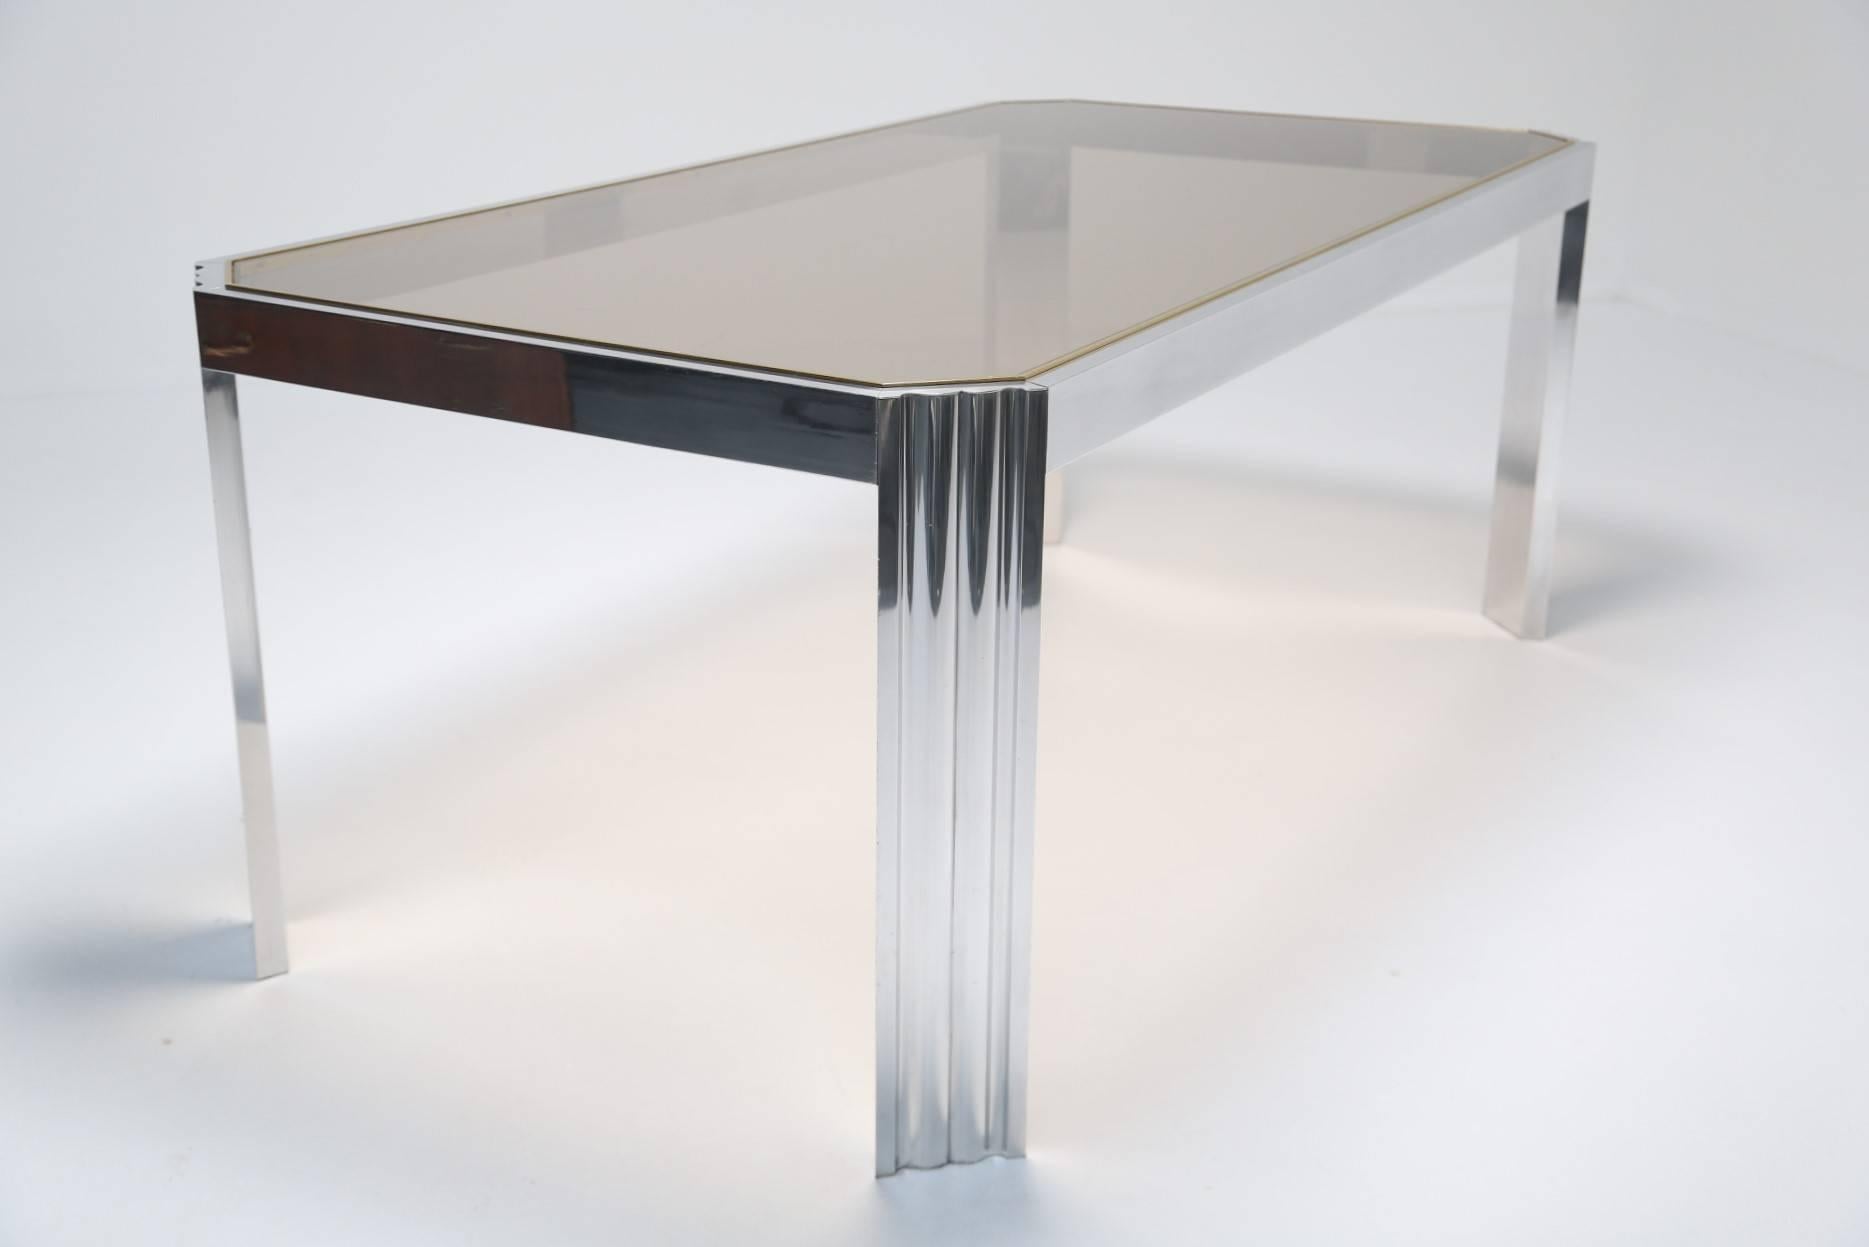 A very elegant and simple aluminum dining table with glass top and a delicate brass trim which frames the glass top beautifully. The table looks chrome but is in fact polished aluminum which means it  is easy to keep shiny and clean. The table has